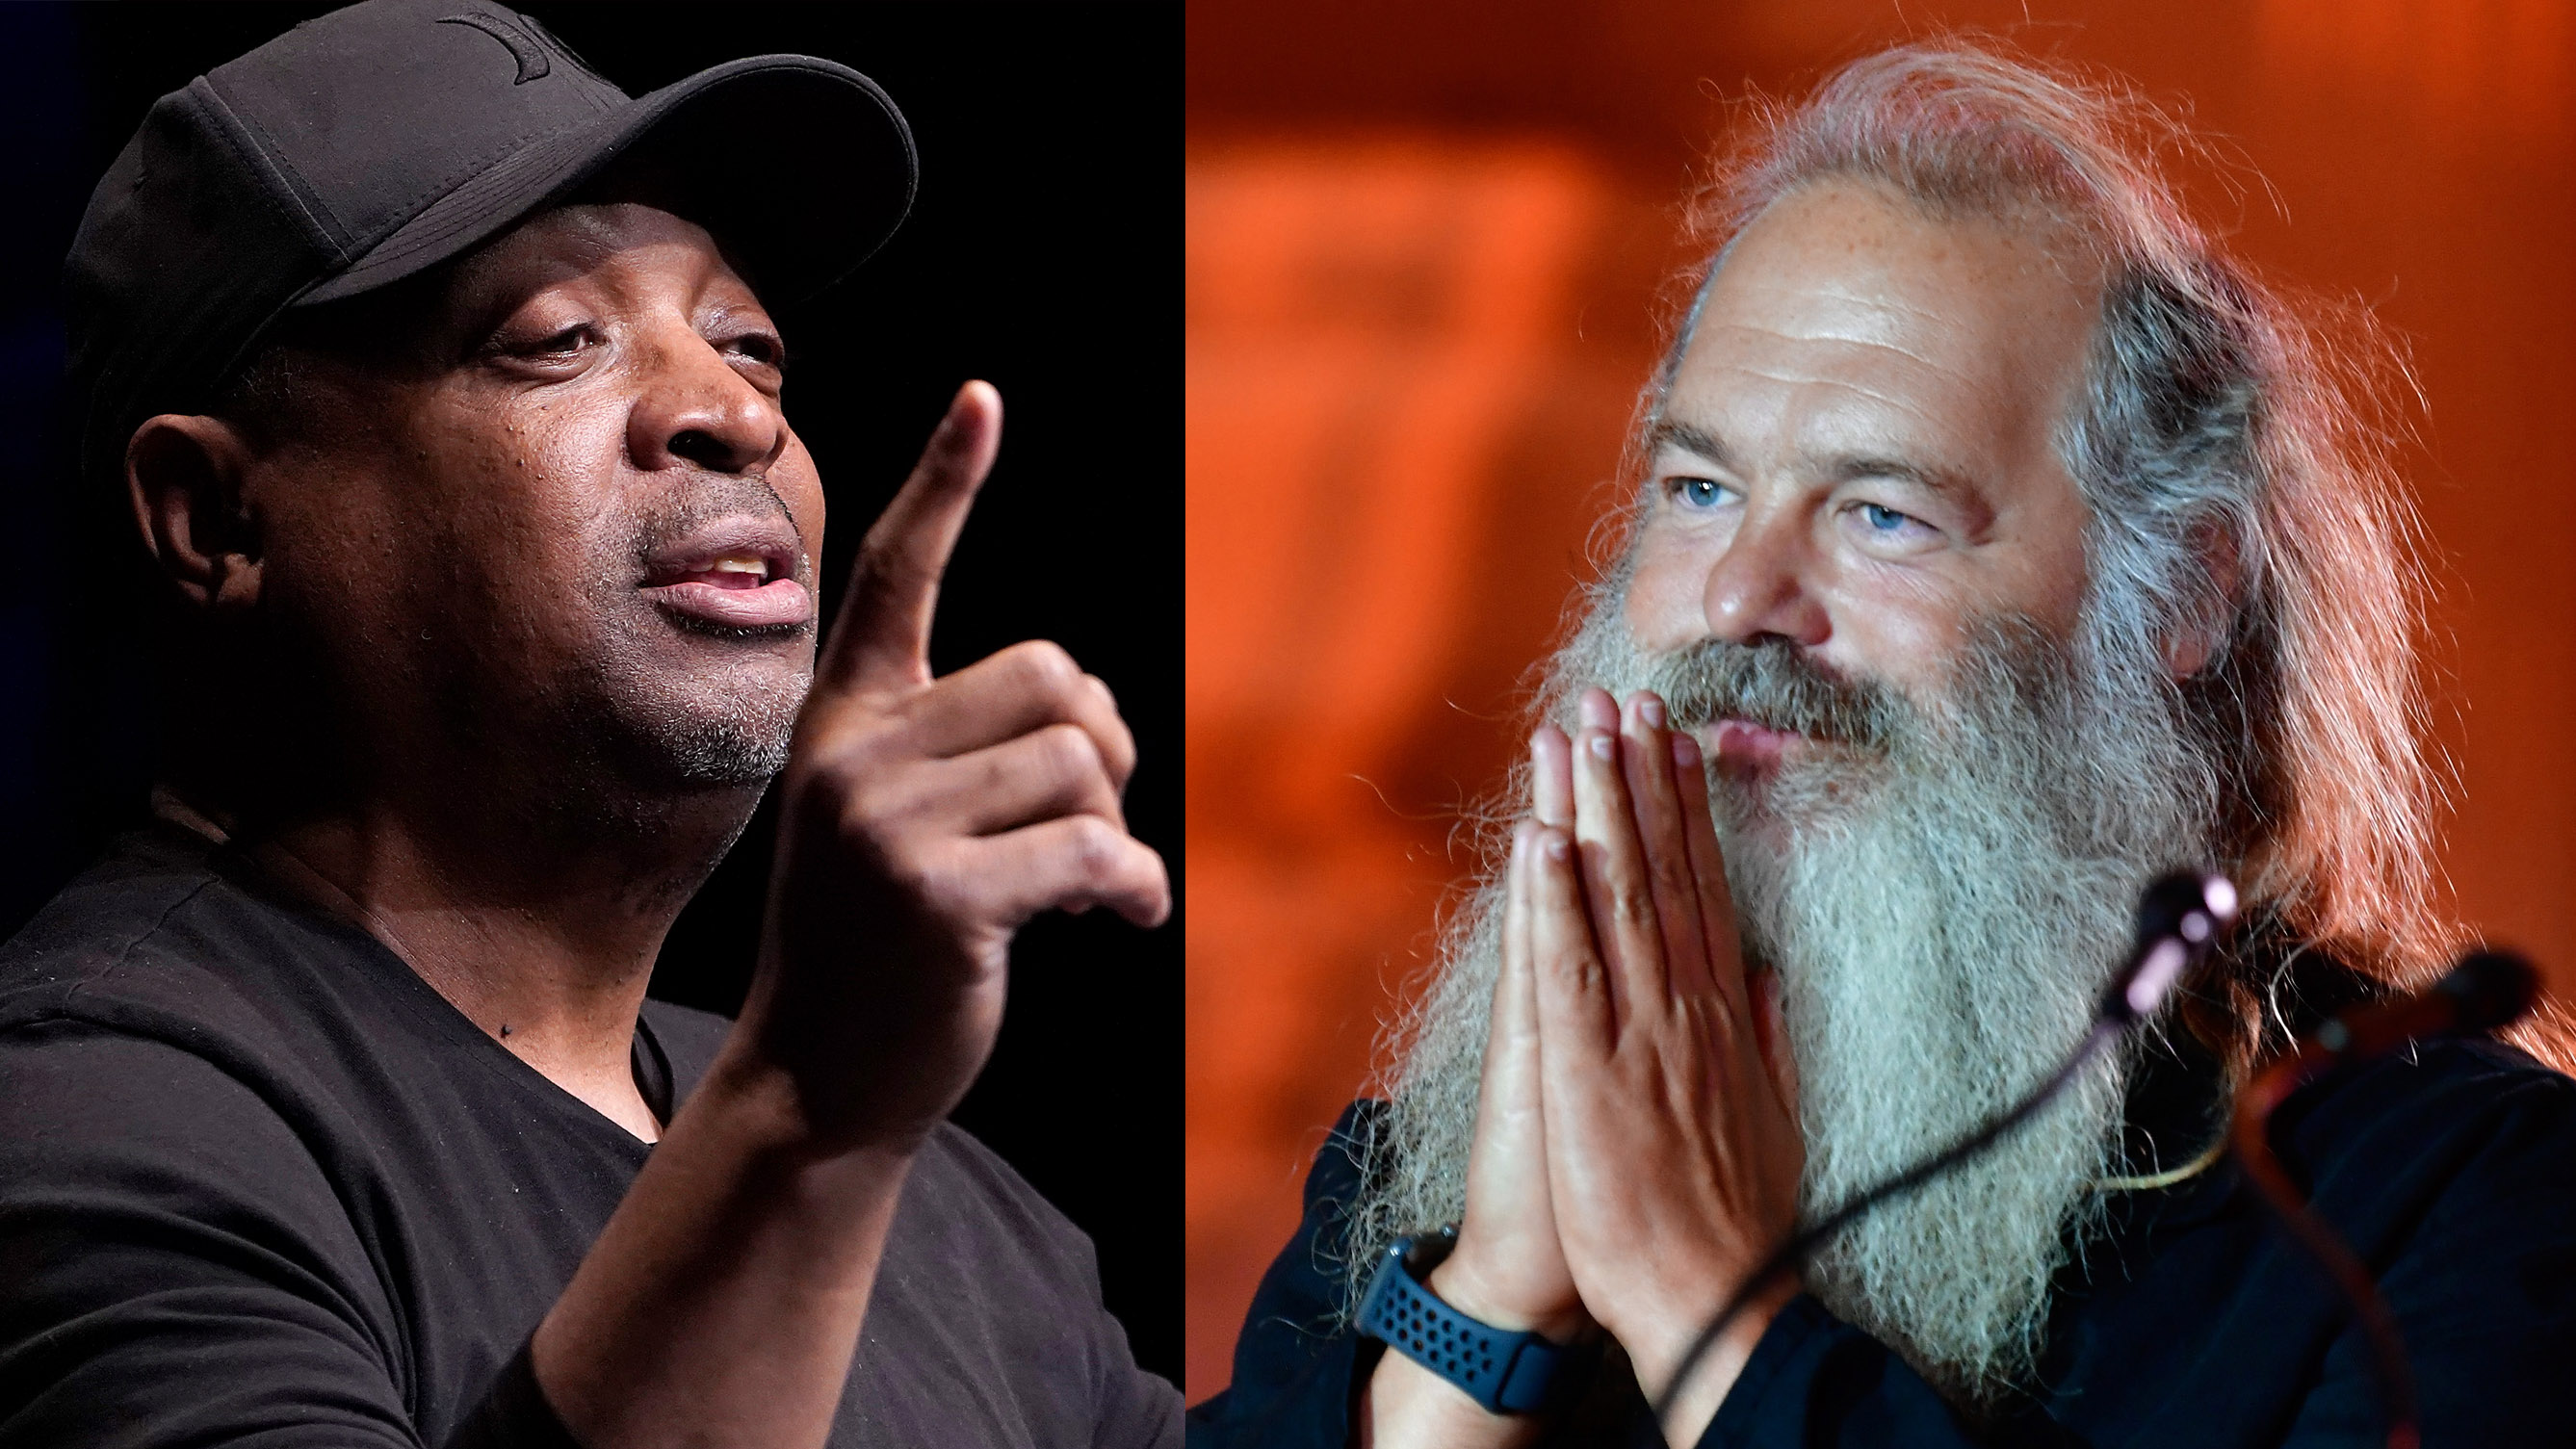 Chuck D on Rick Rubin's holistic production style: Art is what you feel.  No one should tell you what Art should come out of you. He gets that